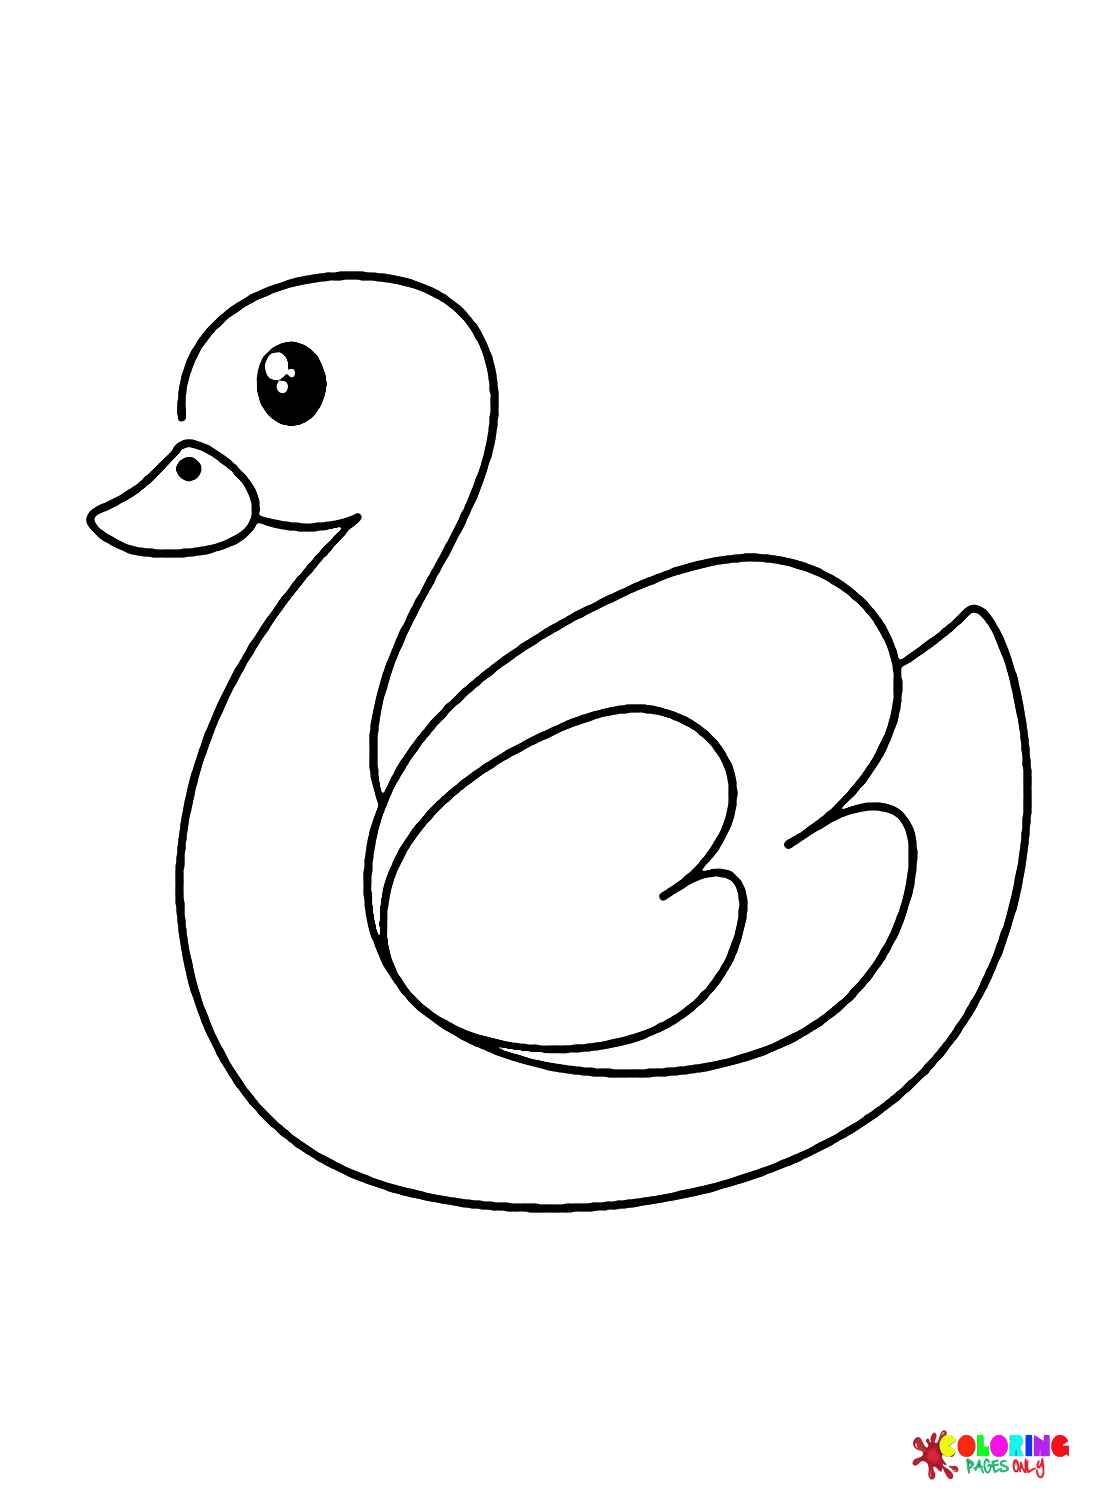 White Swan from Swan